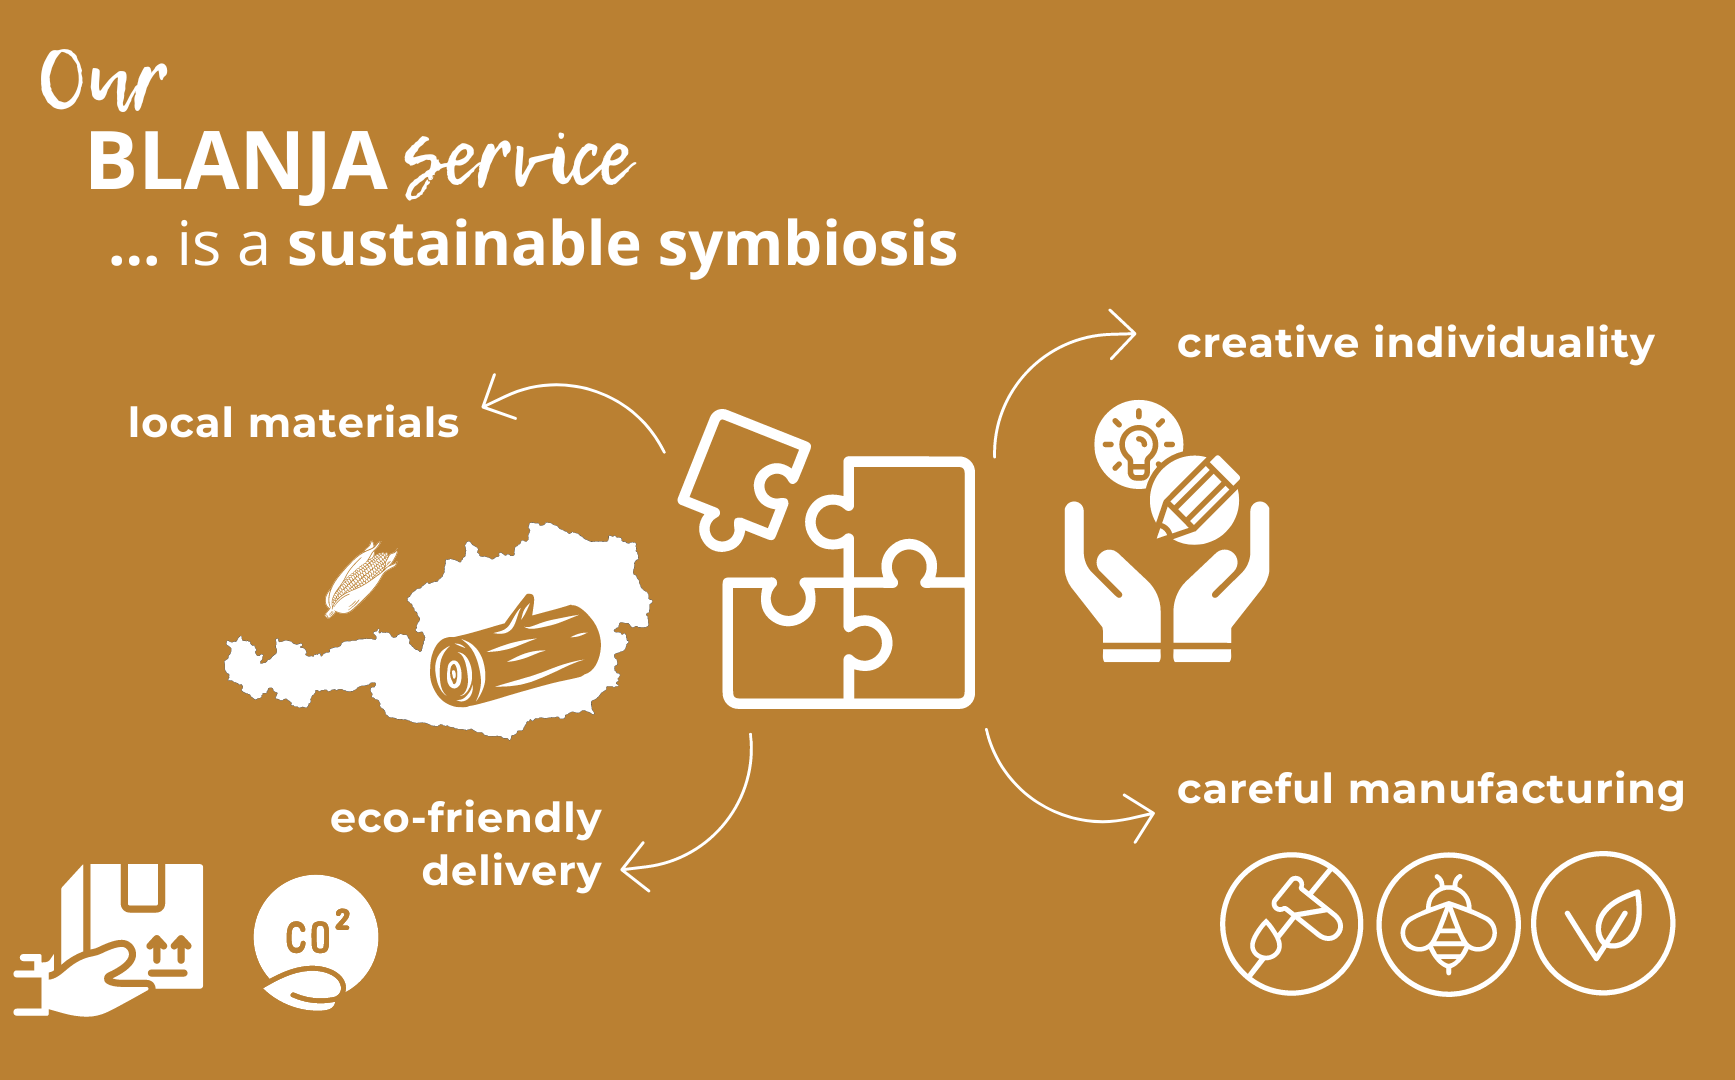 Blanja service - a sustainable symbiosis